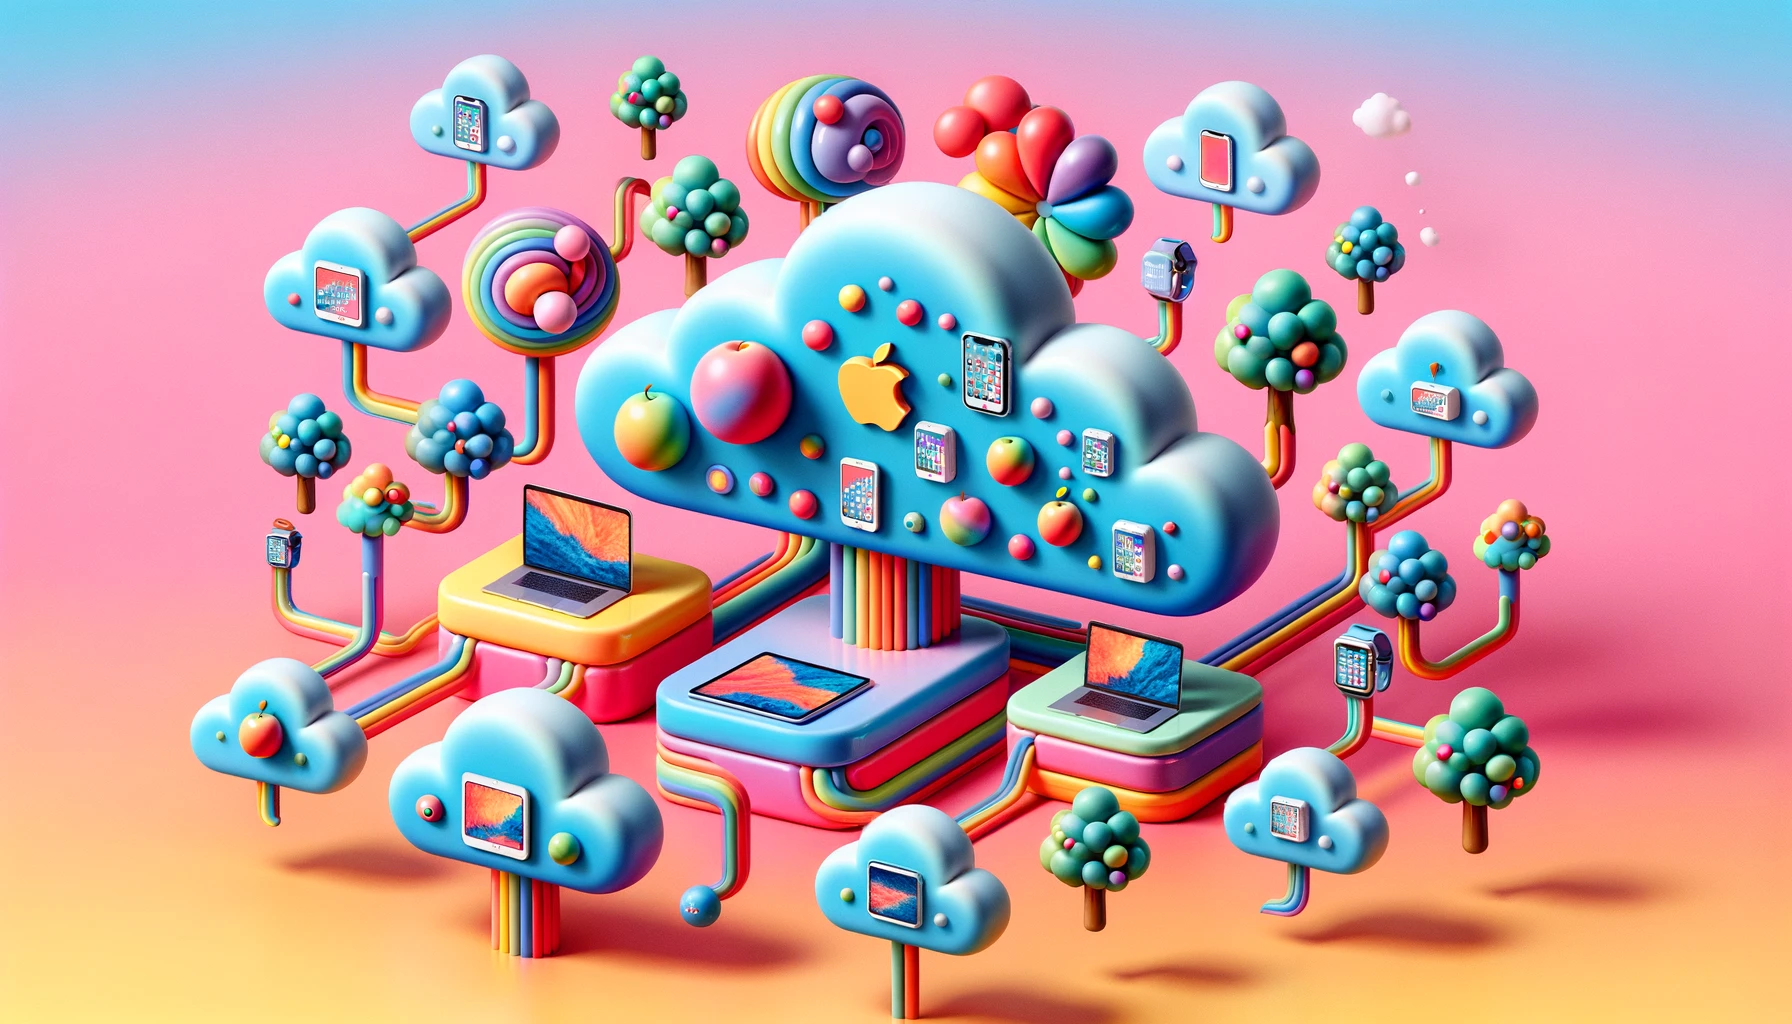 A dreamy depiction of cloud computing made tangible, with decision trees emanating from floating islands.